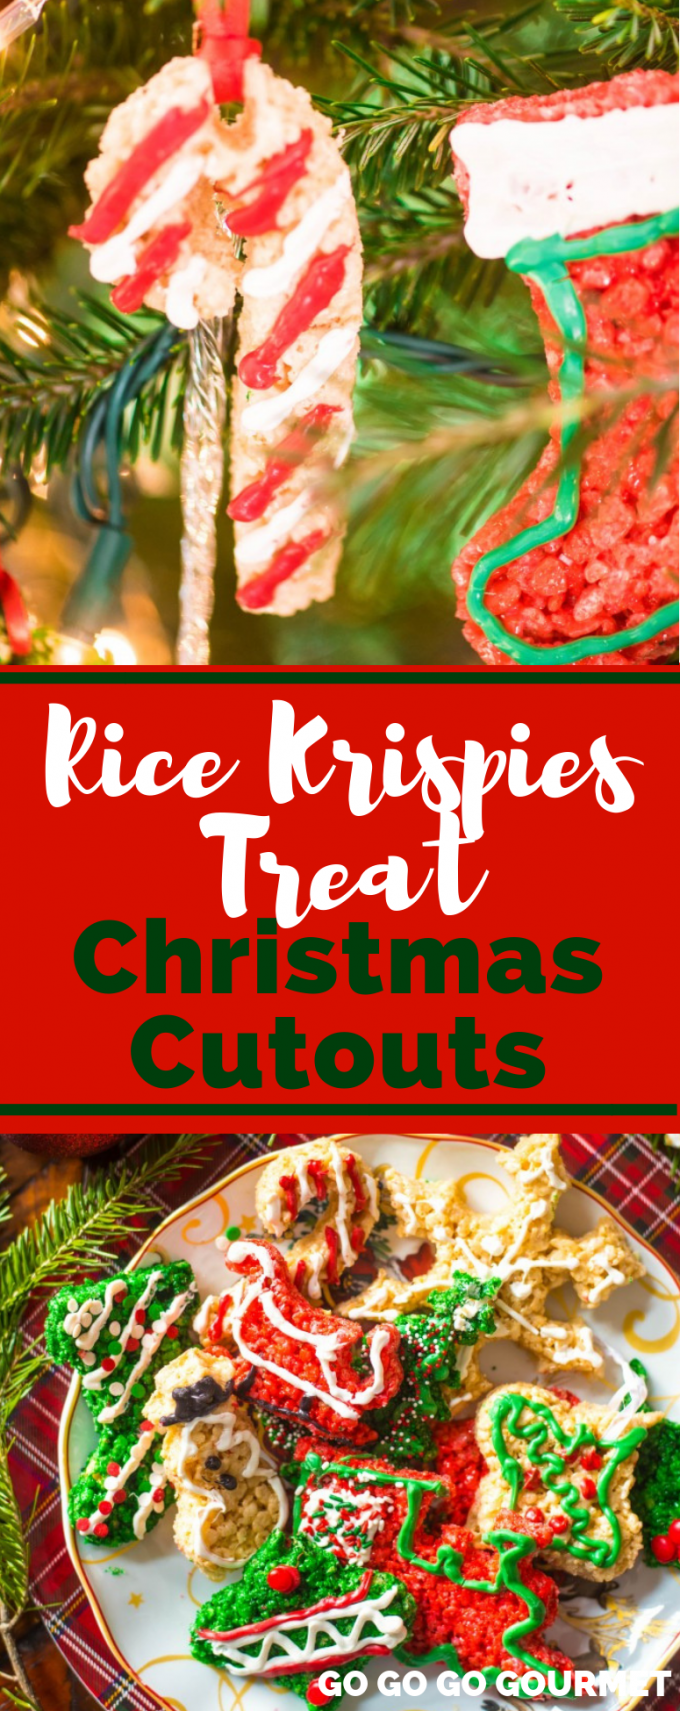 These Rice Krispies Treat Cutouts are one of the best dessert recipes for the holiday! Using cookie cutters, you can quickly and easily make a tree, reindeer, wreath or snowman! The ideas are endless. It's simple for the kids to help with, too! #gogogogourmet #ricekrispiestreatchristmascutouts #christmasdesserts #cutoutcookies via @gogogogourmet